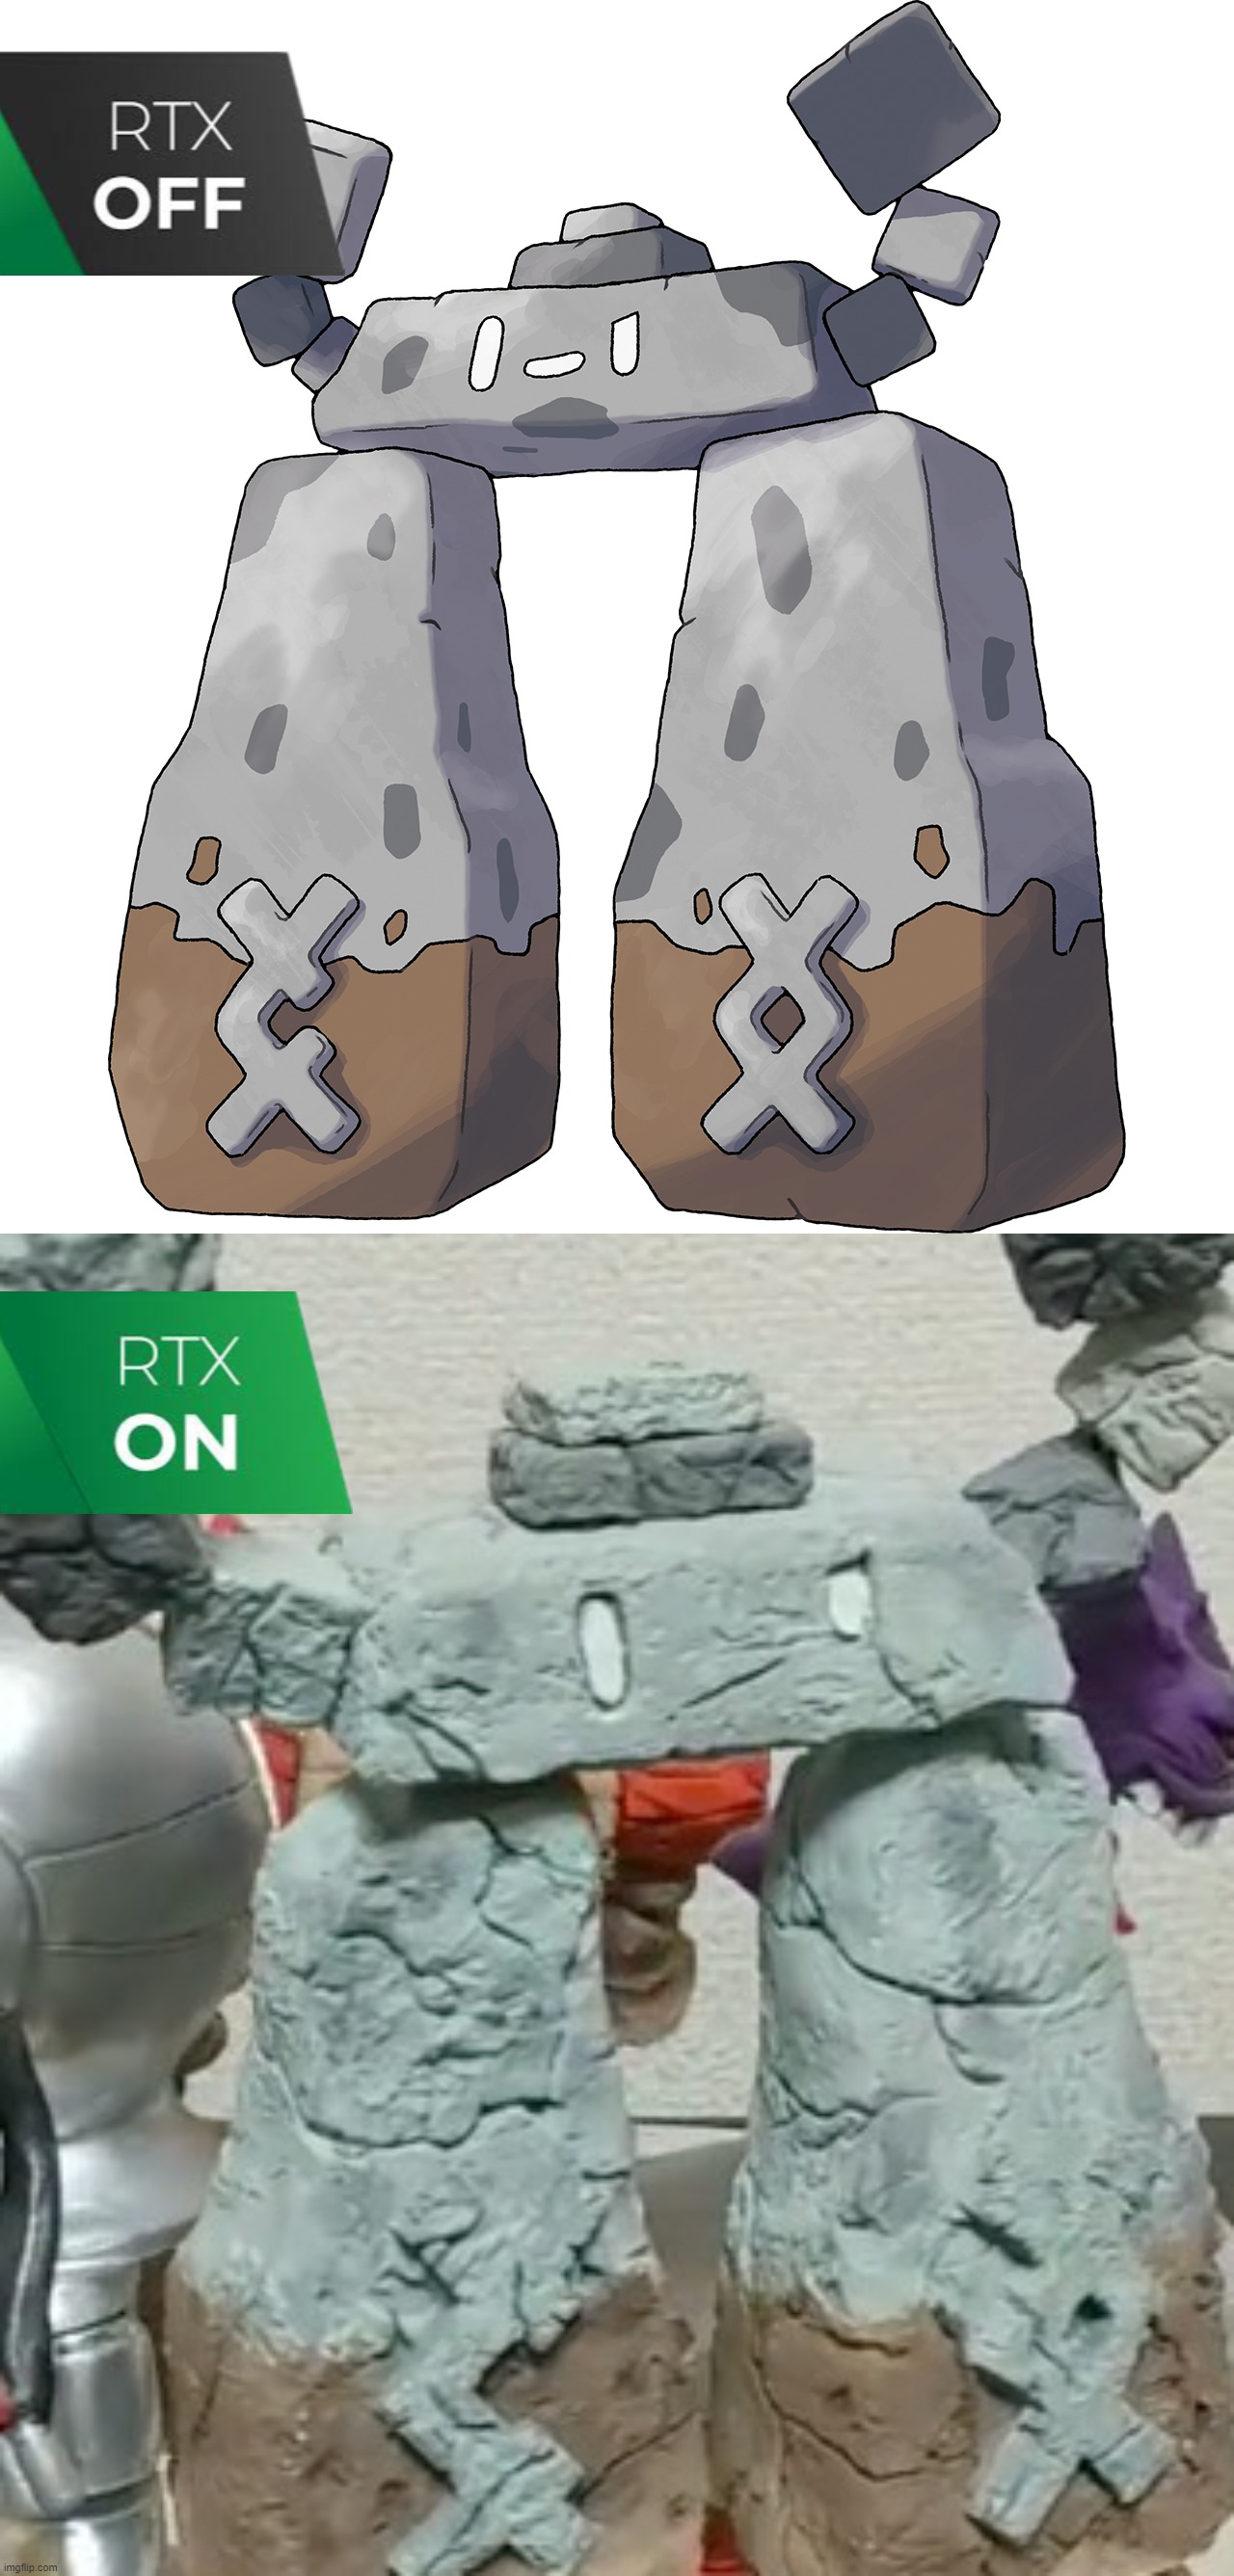 RTX Stonjourner | image tagged in stonjourner,rtx on and off,rtx | made w/ Imgflip meme maker